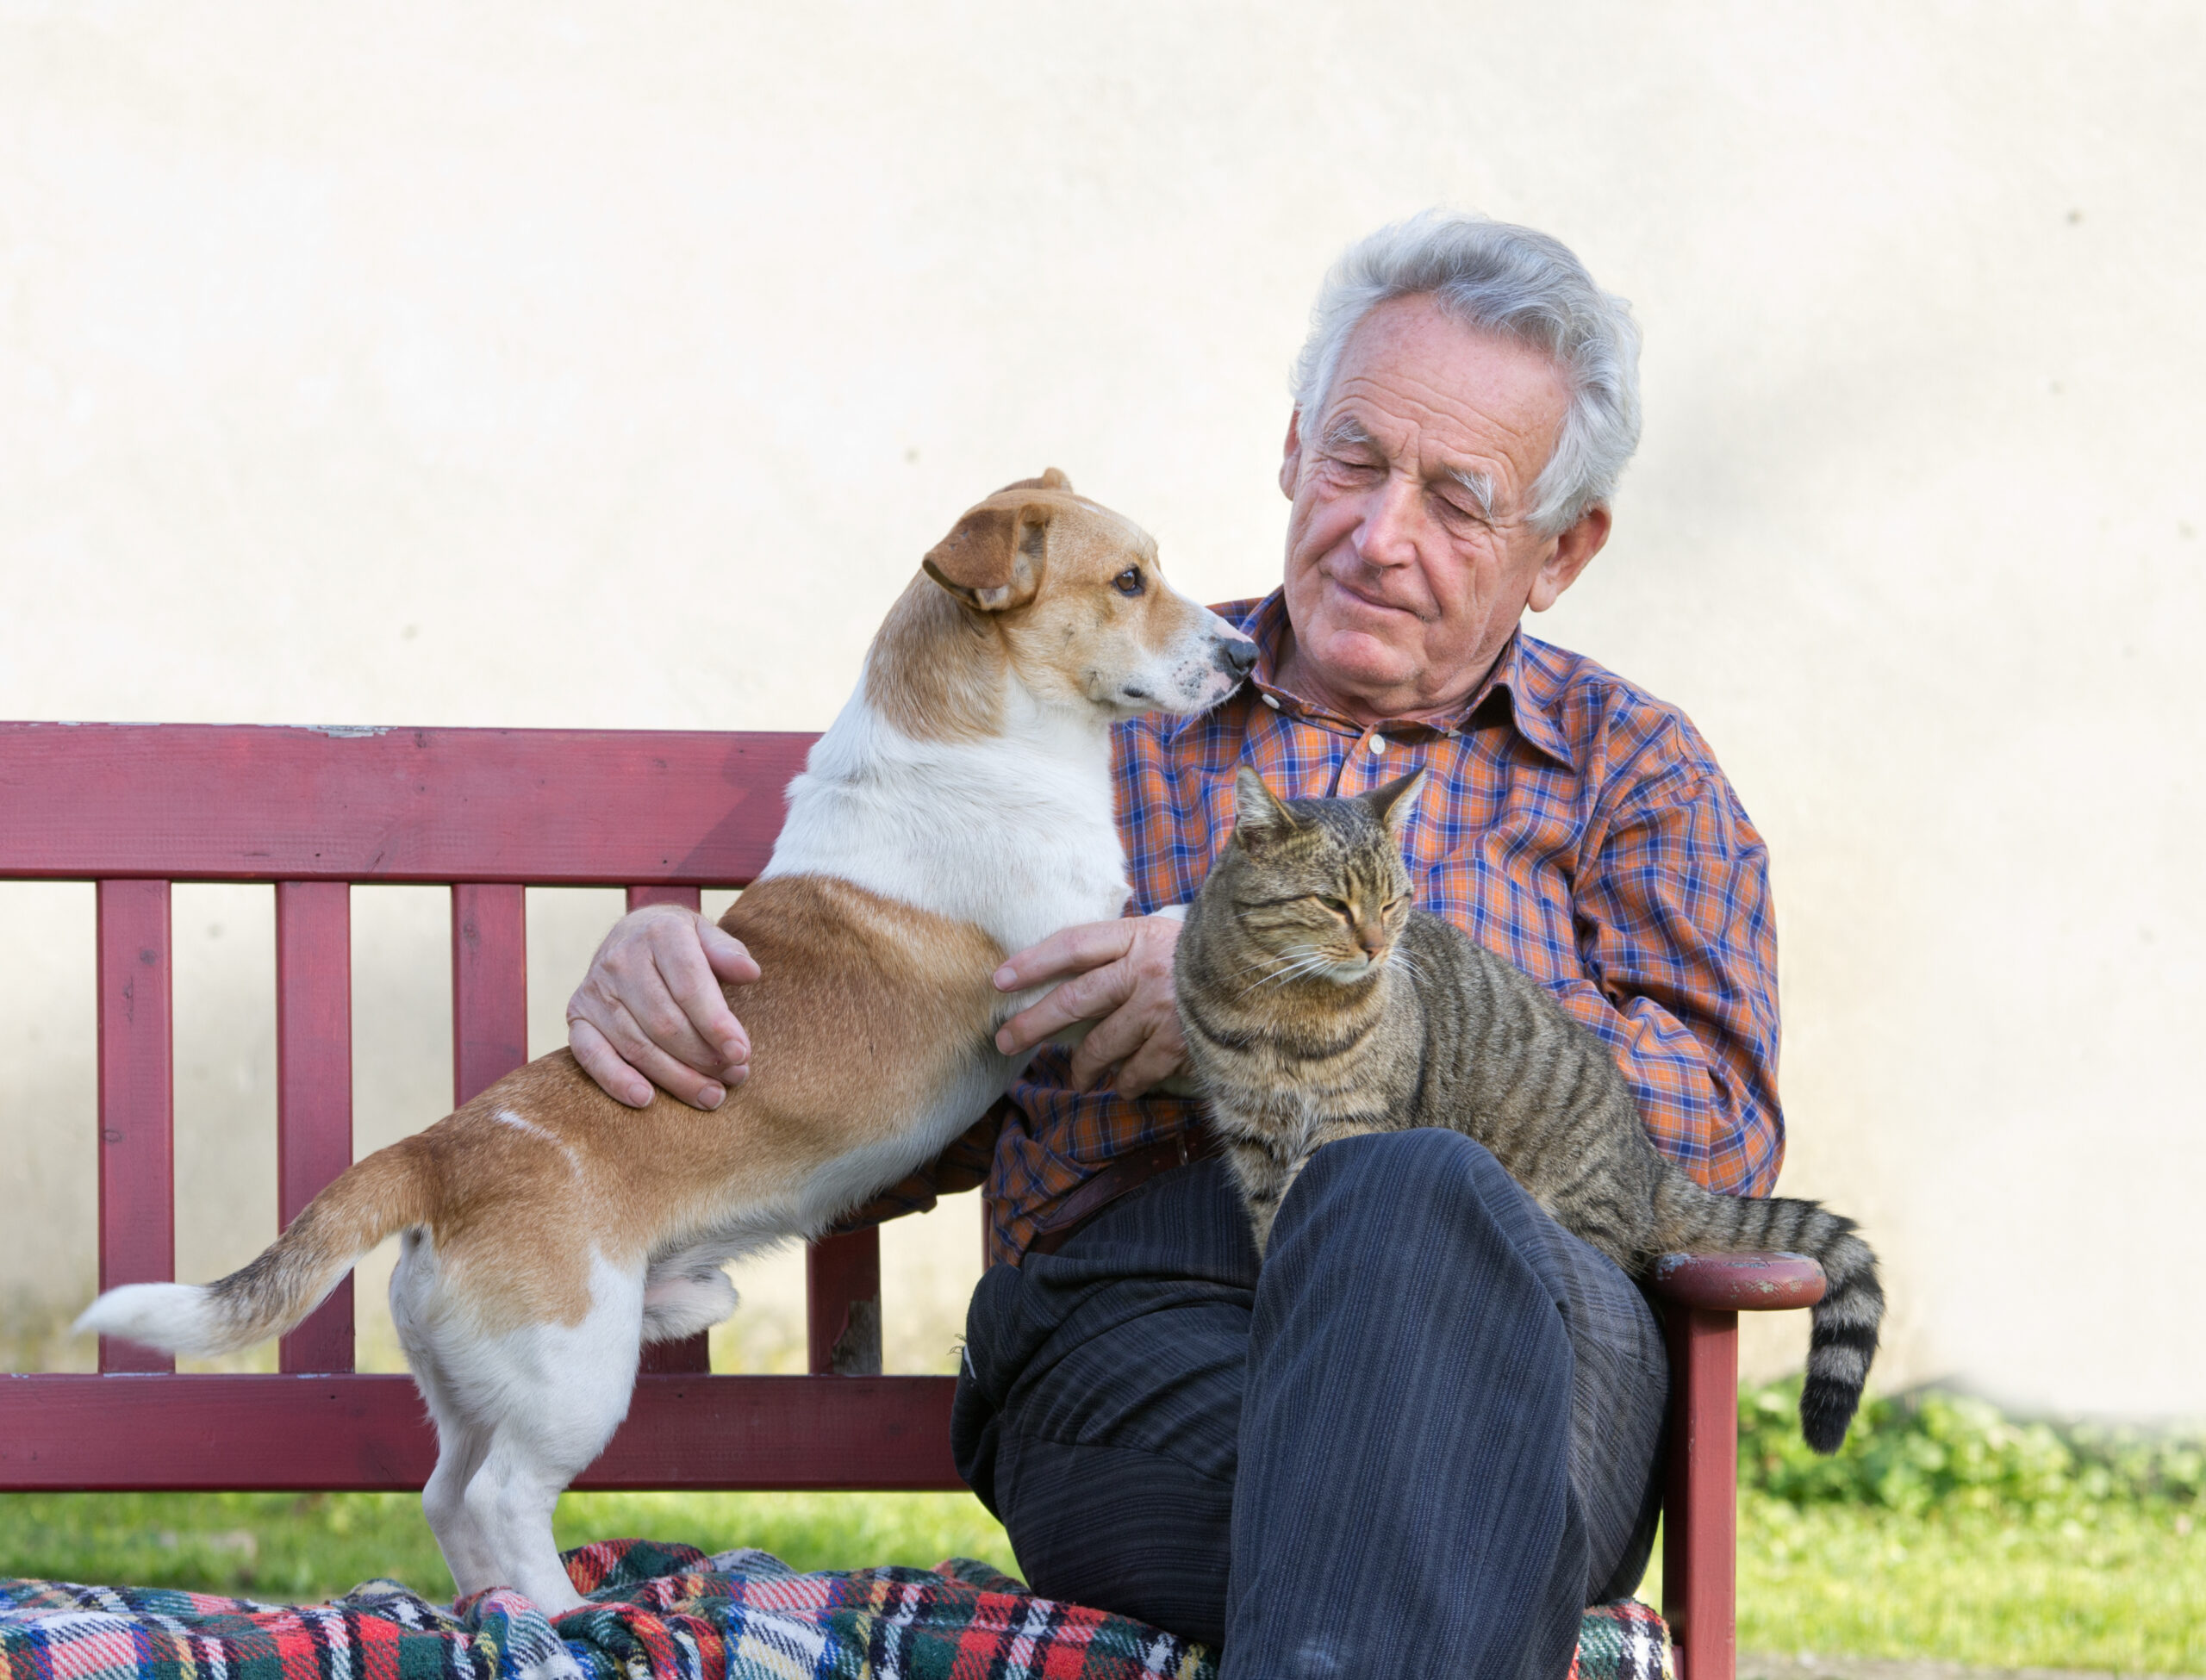 senior-man-wirh-dog-and-cat-on-his-lap-on-bench-4